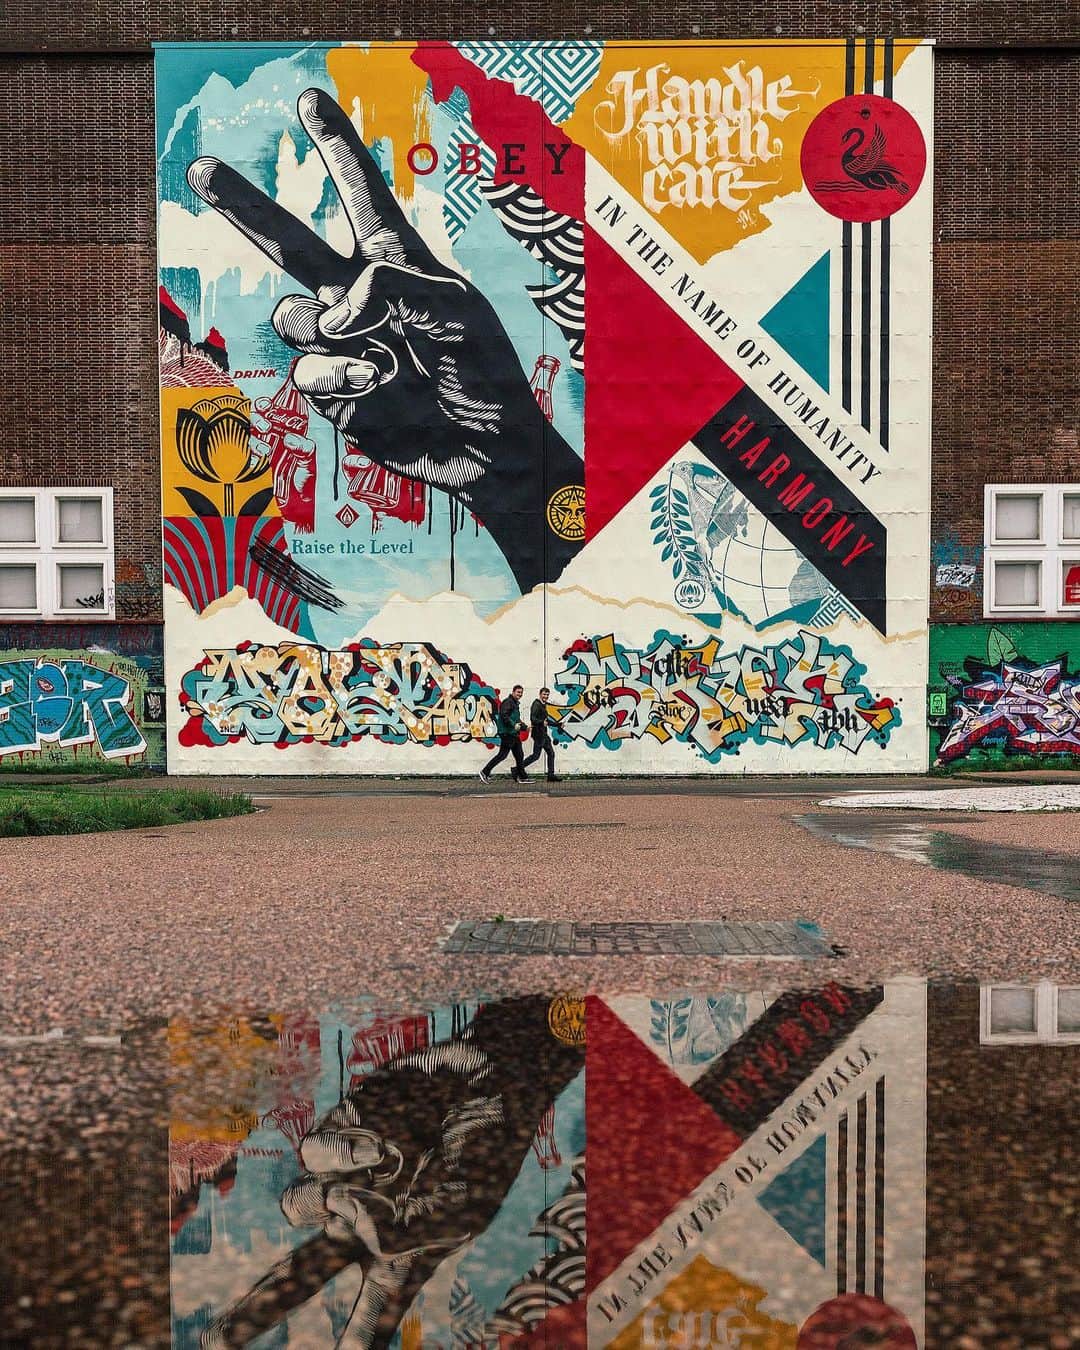 Shepard Faireyさんのインスタグラム写真 - (Shepard FaireyInstagram)「Reflecting on my mural at the Straat Museum in Amsterdam, I feel very lucky that though it rains a lot here, the weather allowed us to finish the mural on time despite some intense winds. The Straat is a huge old factory where they built ships so the surface I painted is a set of metal doors 45 feet high formerly used to get the ship parts out of the building. The doors are a smooth surface and provided an ideal canvas for the “Raise the Level” mural. The mural is based on one of my art pieces focused on peace and harmony which is included in my exhibition at Straat. I also added some additional text and imagery to fit the composition of the doors. I have been friends with Amsterdam local and calligraffiti pioneer Niels Shoe Meulman for over 10 years and I asked him if he would collaborate on part of the mural. He generously added the “Handle with Care” in his unique style as well as a wild style piece down below. He also brought his friend, and O.G. graff writer Yalt to do the piece on the lower left. I’m very happy about the street art and graffiti hybrid of the entire piece because I believe the two genres are driven by the same spirit. Also, the Straat Museum celebrates and showcases both movements. I’m very grateful to my crew of Dan Flores, Rob Zagula, and Jon Furlong for their hard work helping with the mural. Thanks to @jonathanfurlong also for the great photos. A huge thanks to the Straat crew for hosting and being incredibly pro about EVERYTHING. Check out my show “Raise the Level” at Straat if you are in Amsterdam! -Shepard」8月12日 19時44分 - obeygiant